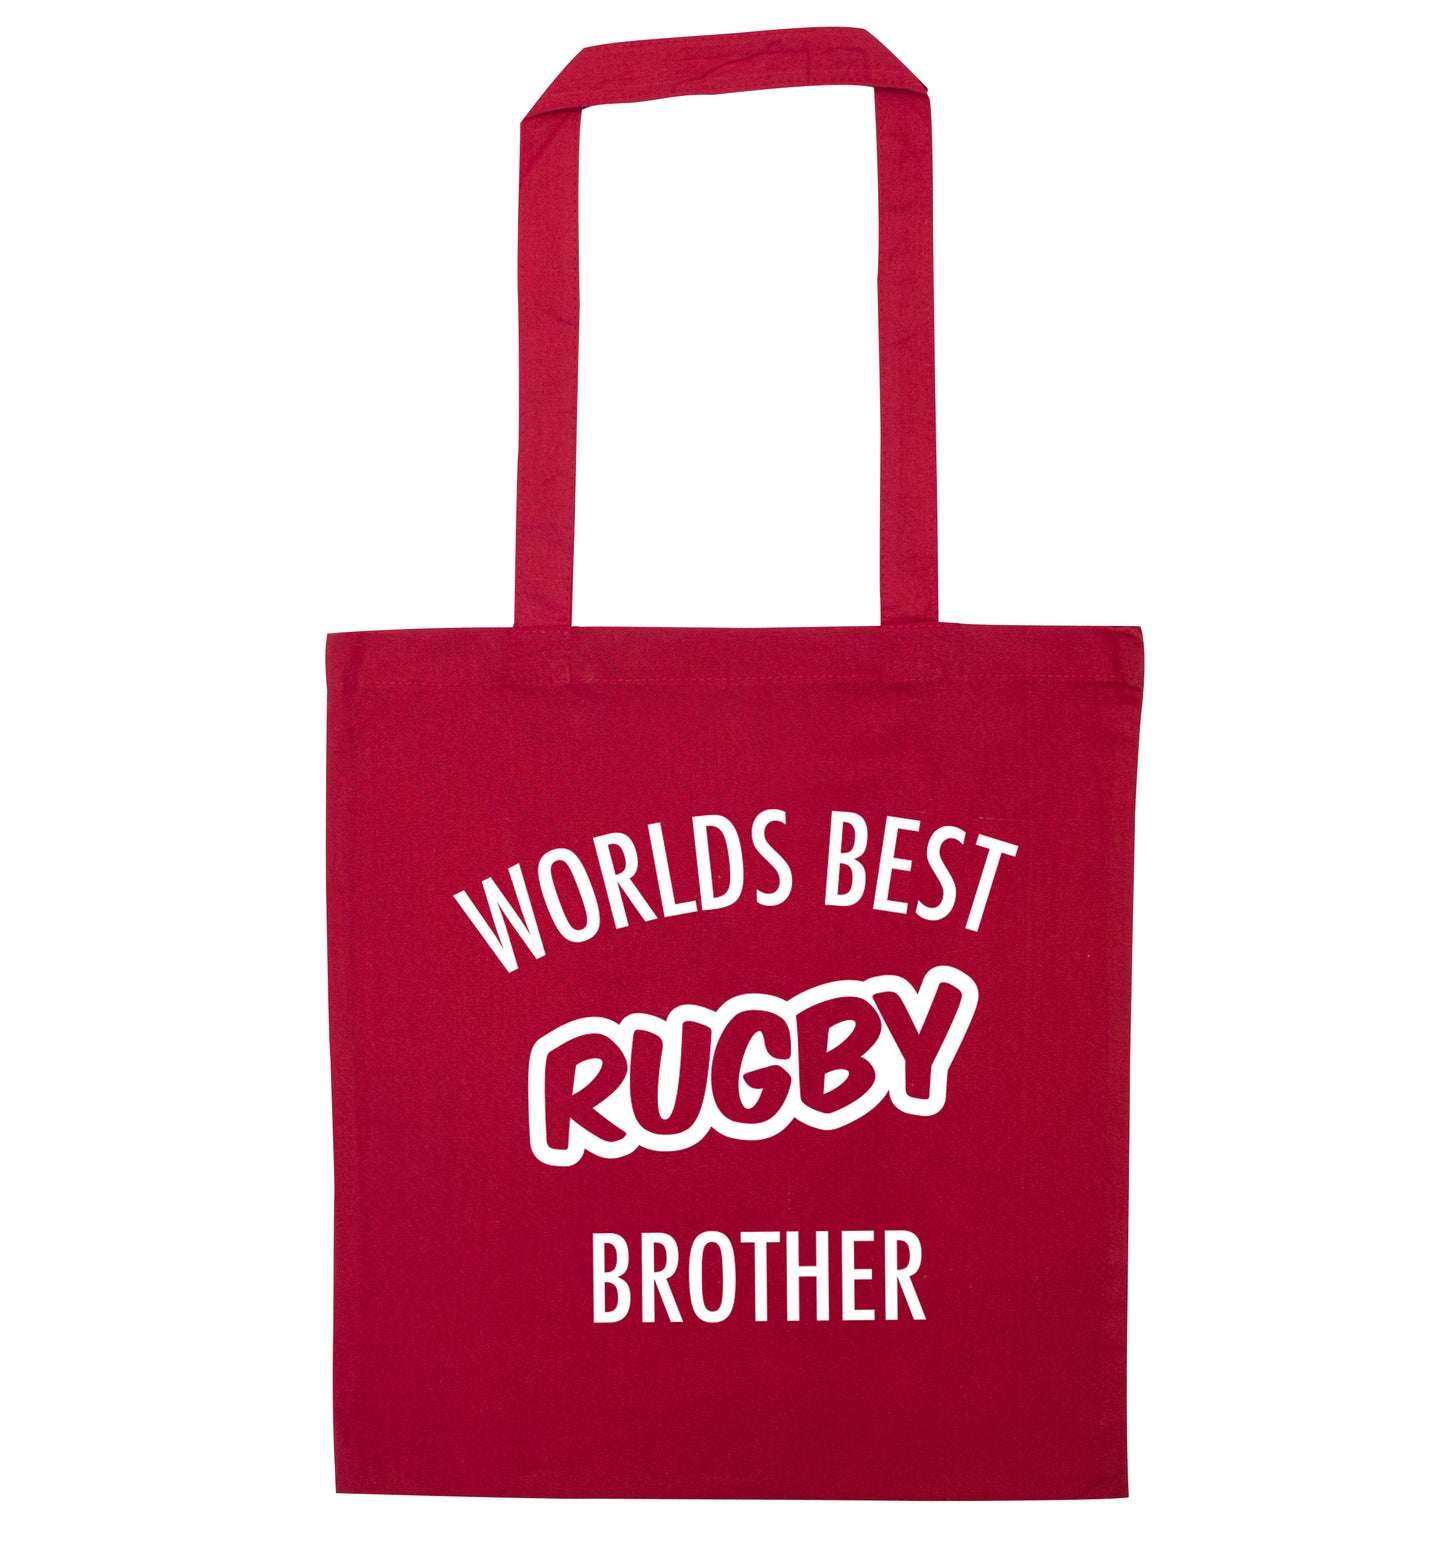 Worlds best rugby brother red tote bag